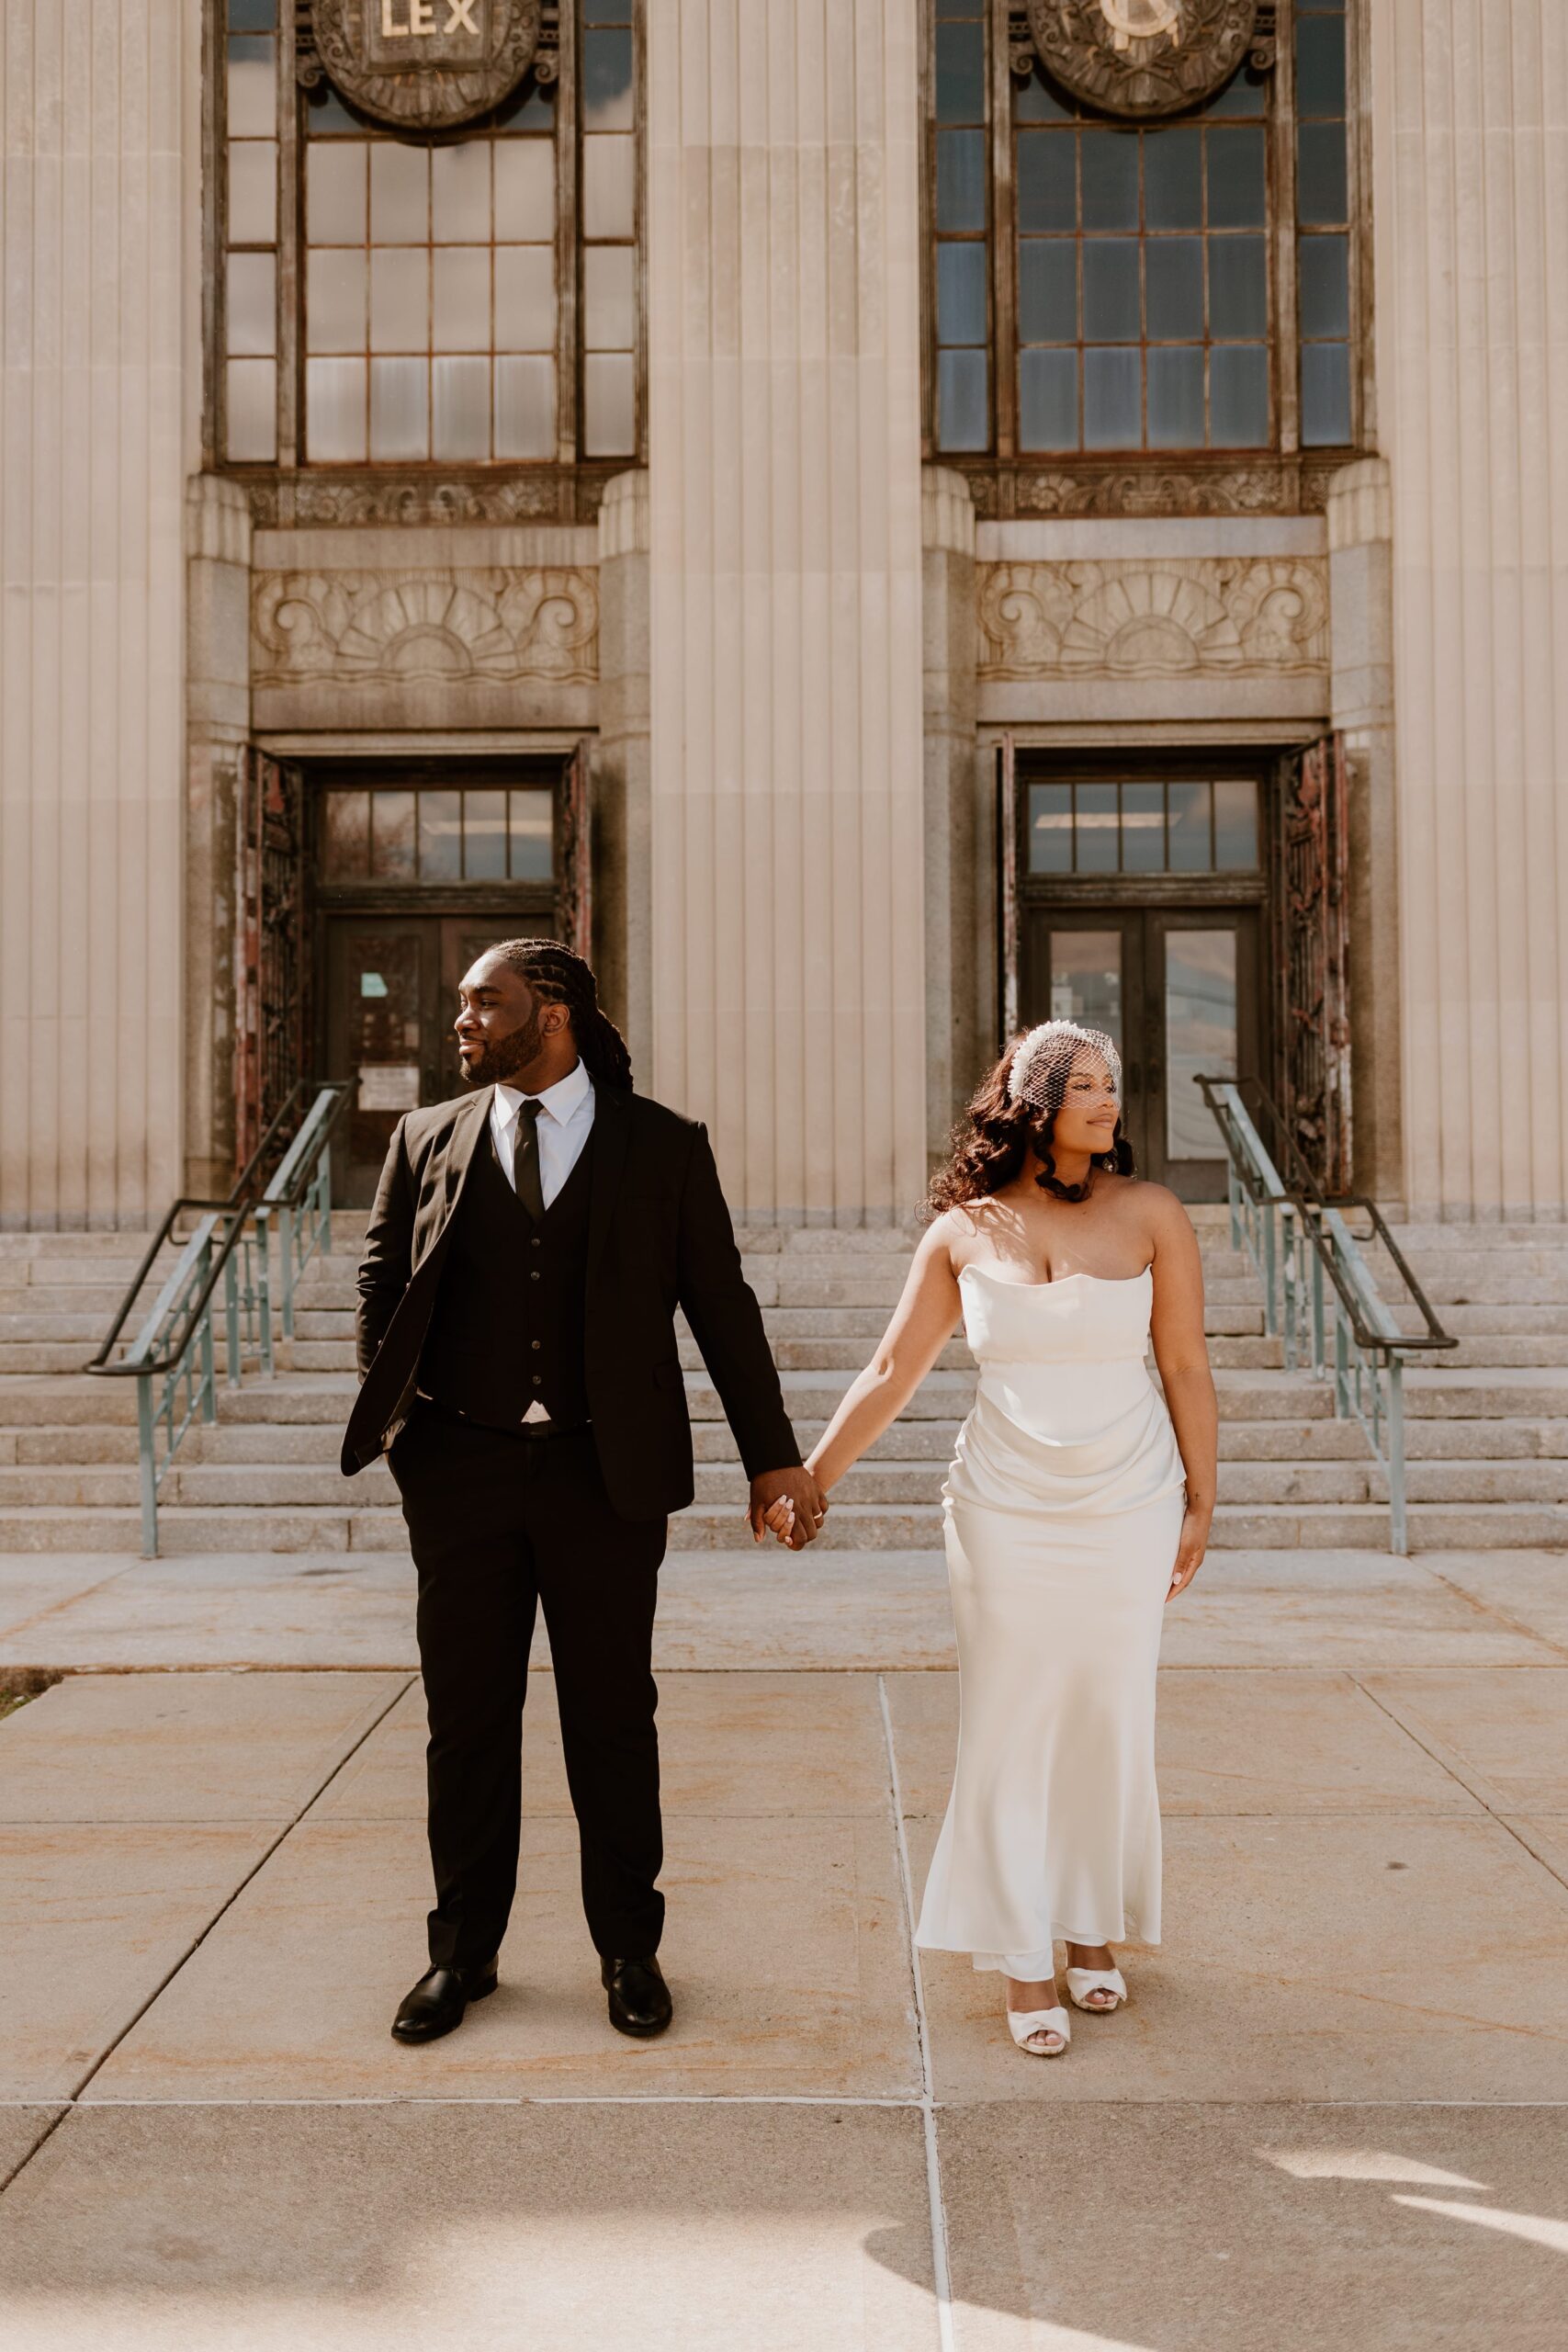 A newlywed couple holding hands in front of the grand entrance of Rockland County Courthouse, showcasing its historic architecture and the couple's elegant wedding attire.